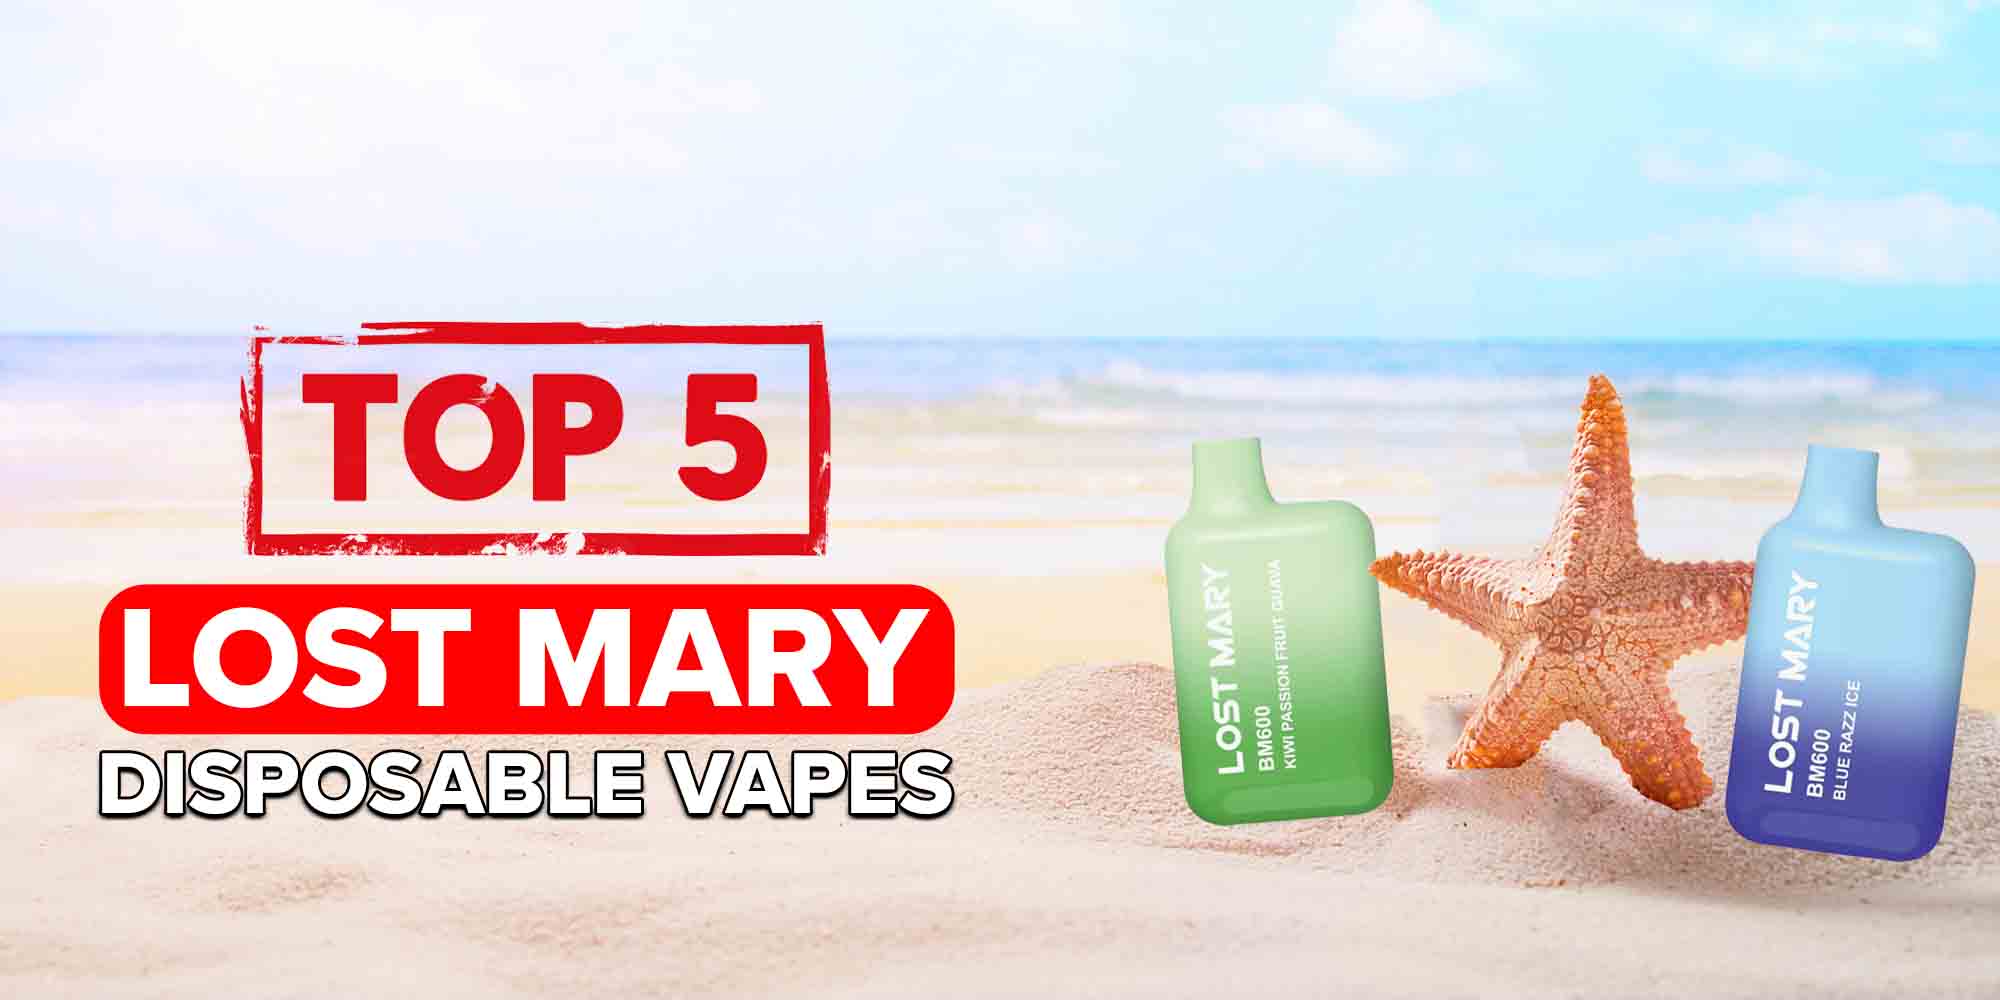 LOST MARY DISPOSABLE VAPES 